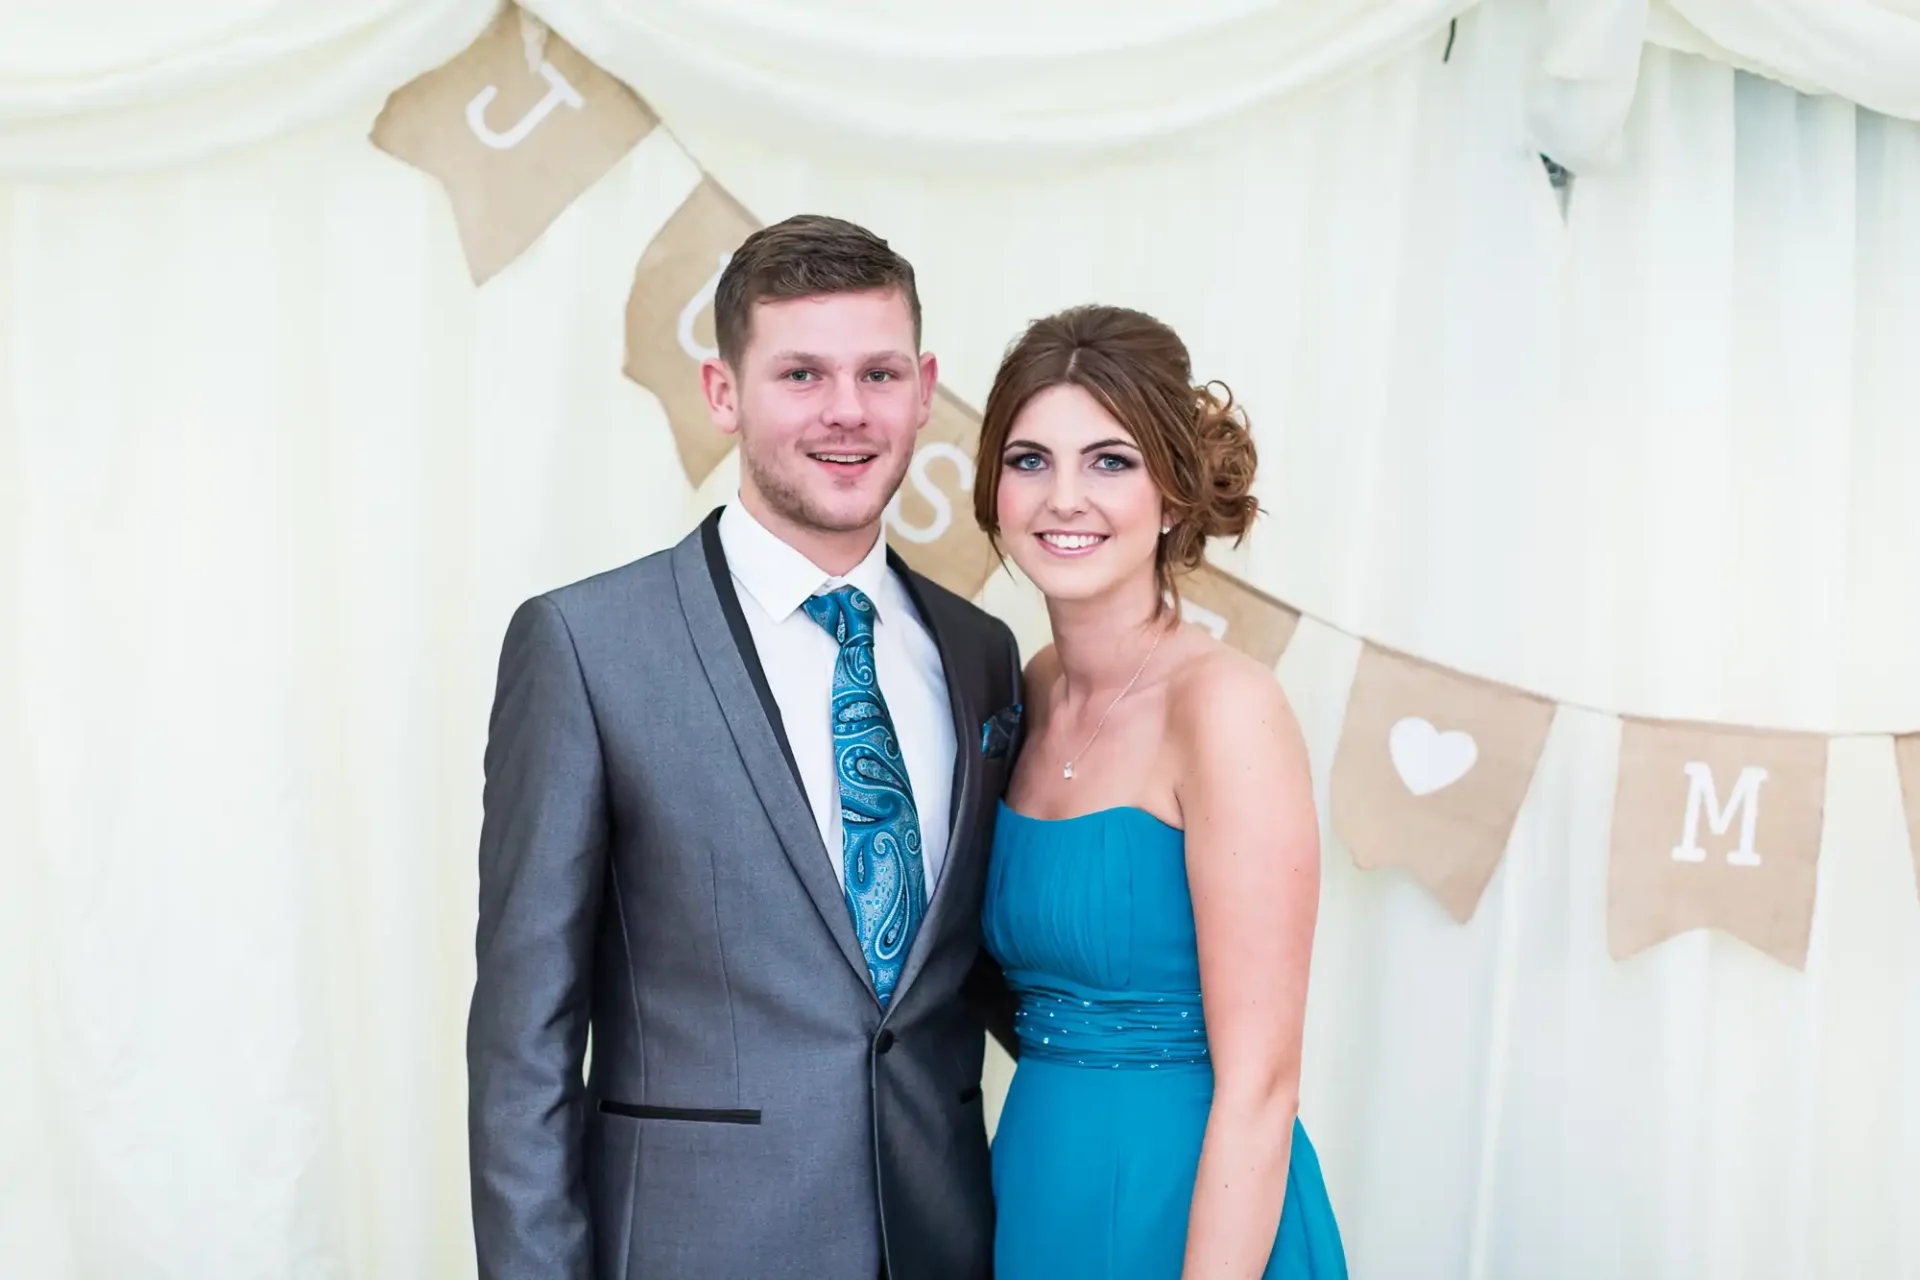 A couple in formal attire smiling for a photo at a wedding, with decorative bunting in the background.